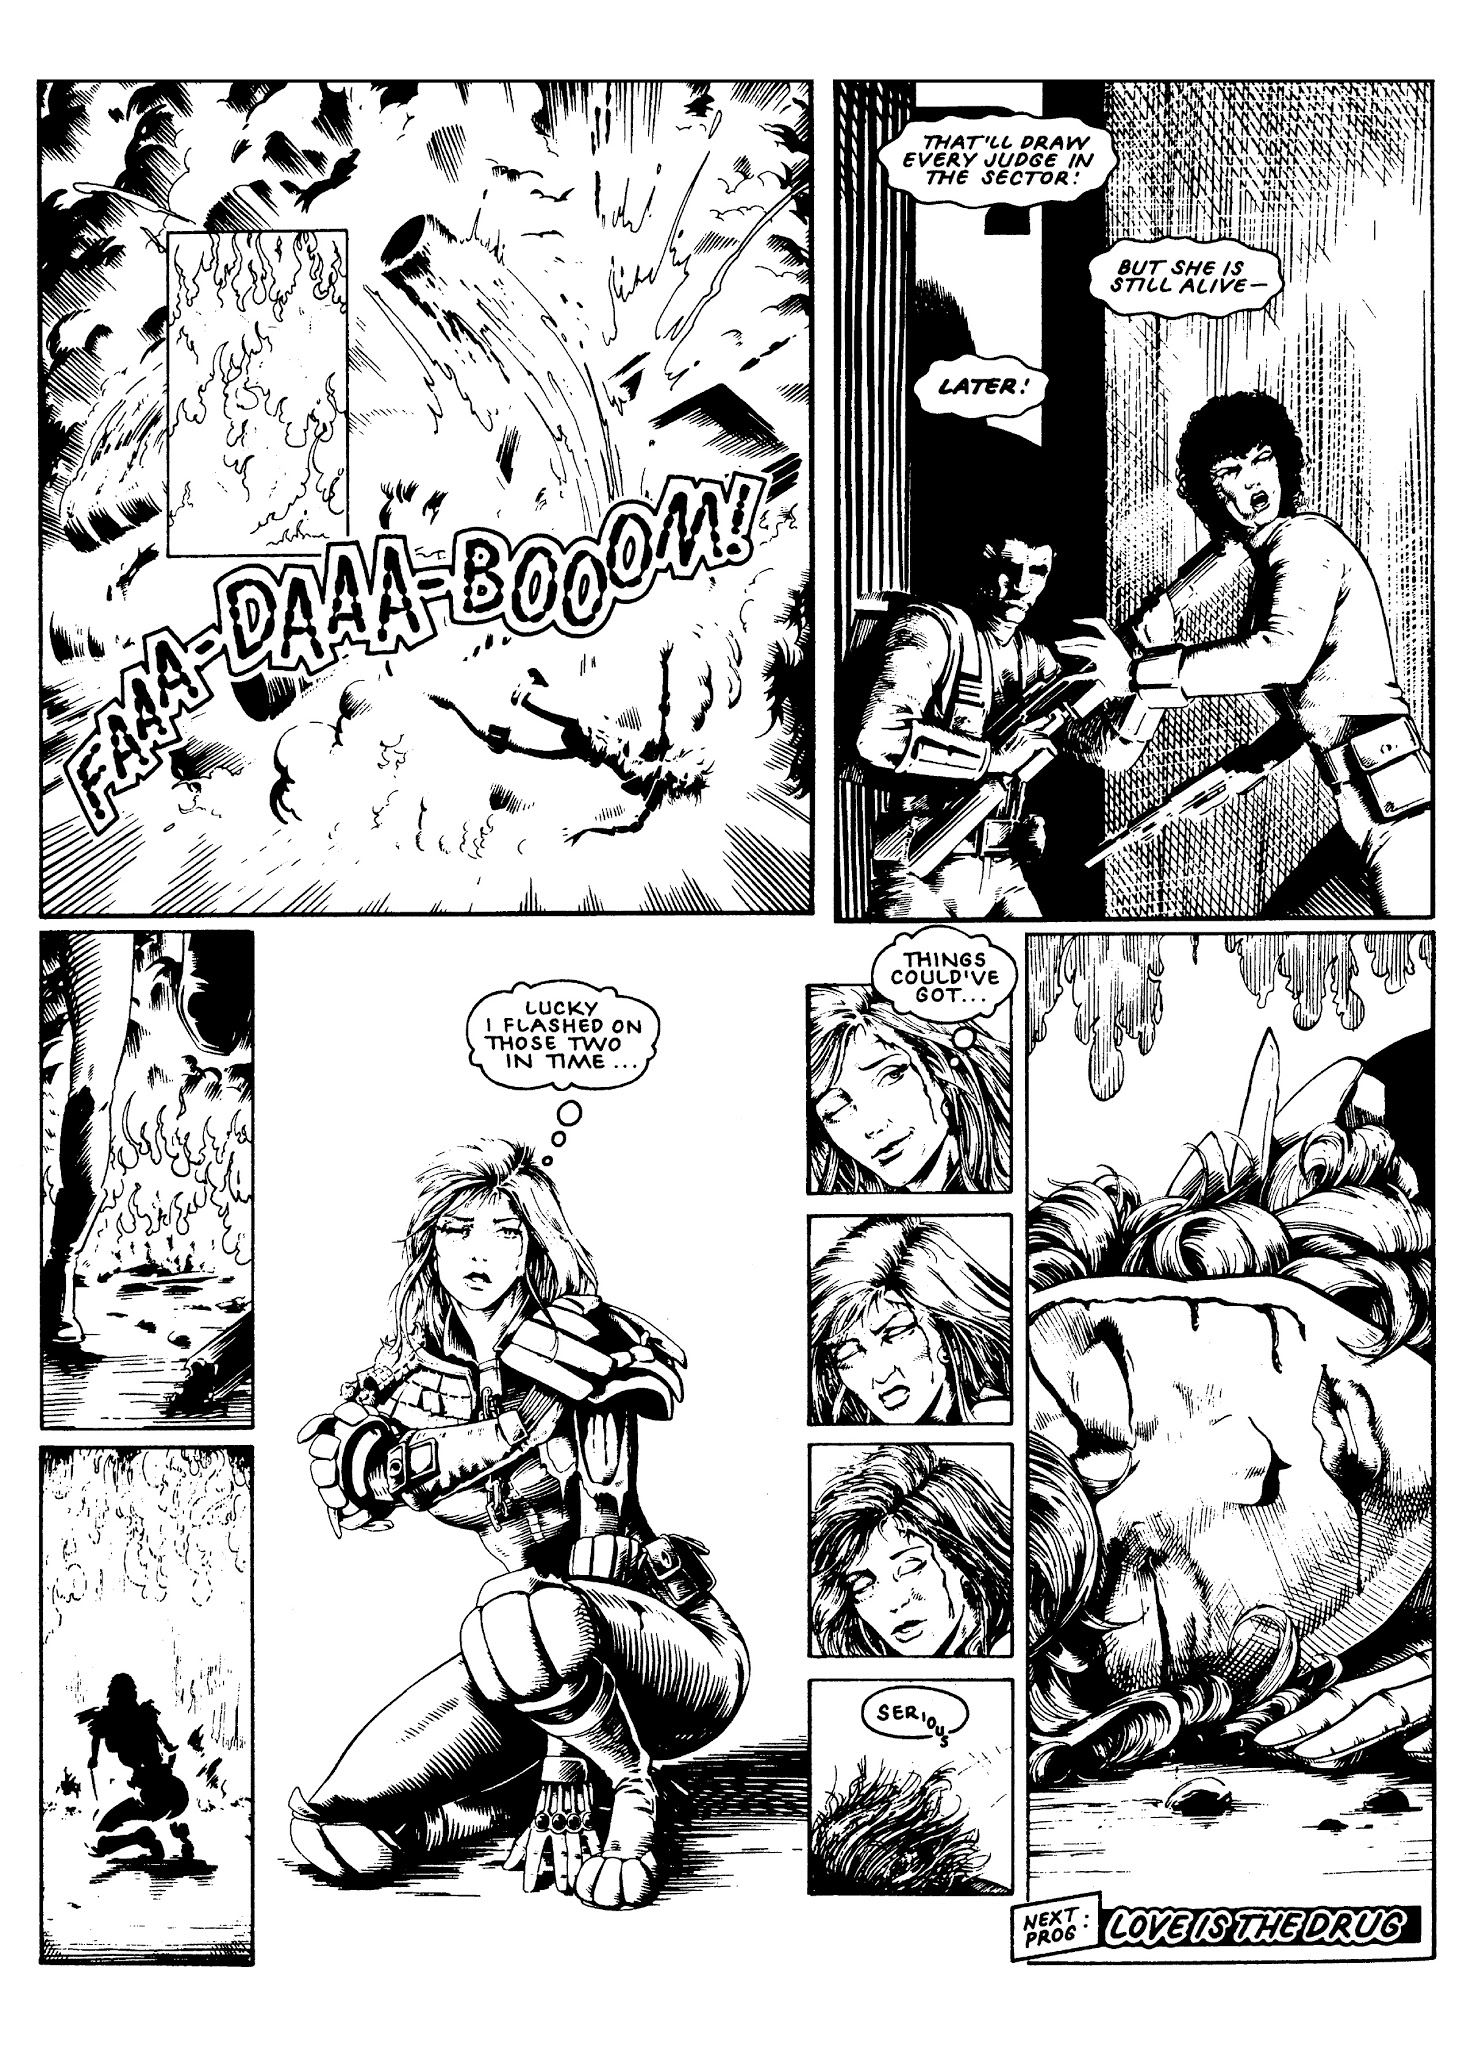 Read online Judge Anderson: The Psi Files comic -  Issue # TPB 1 - 134